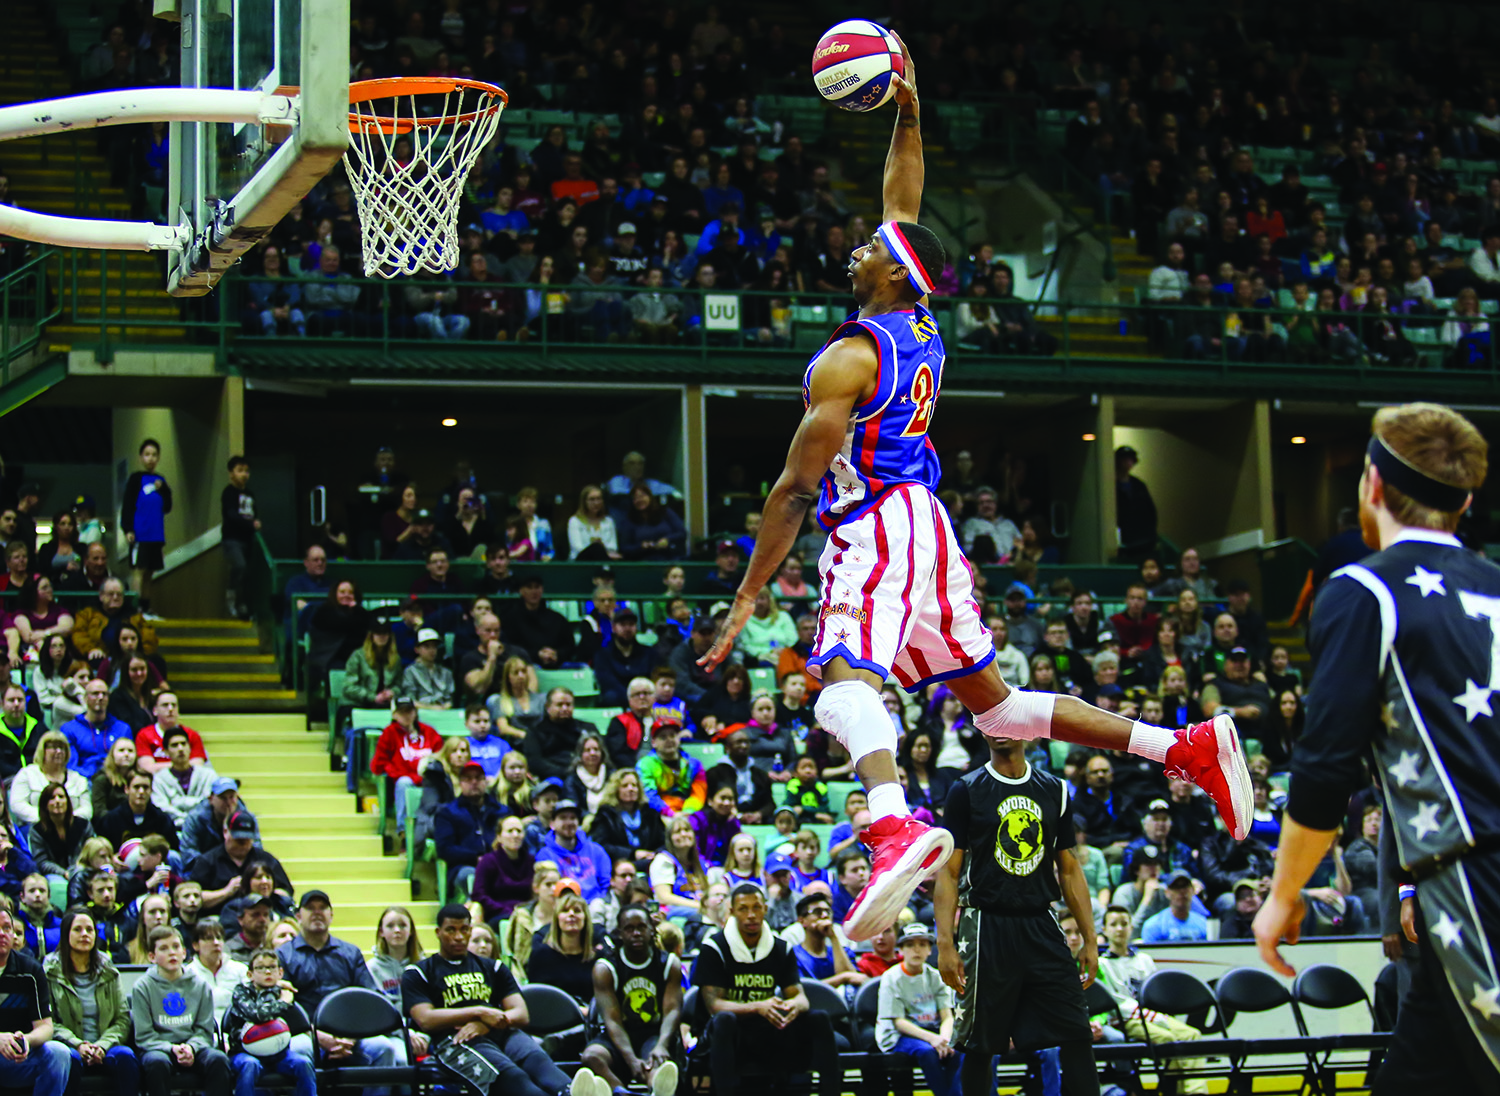 HIGH FLYING- The Harlem Globetrotters entertained fans with soaring basketball stunts and dance moves at the ENMAX Centrium on Friday night.